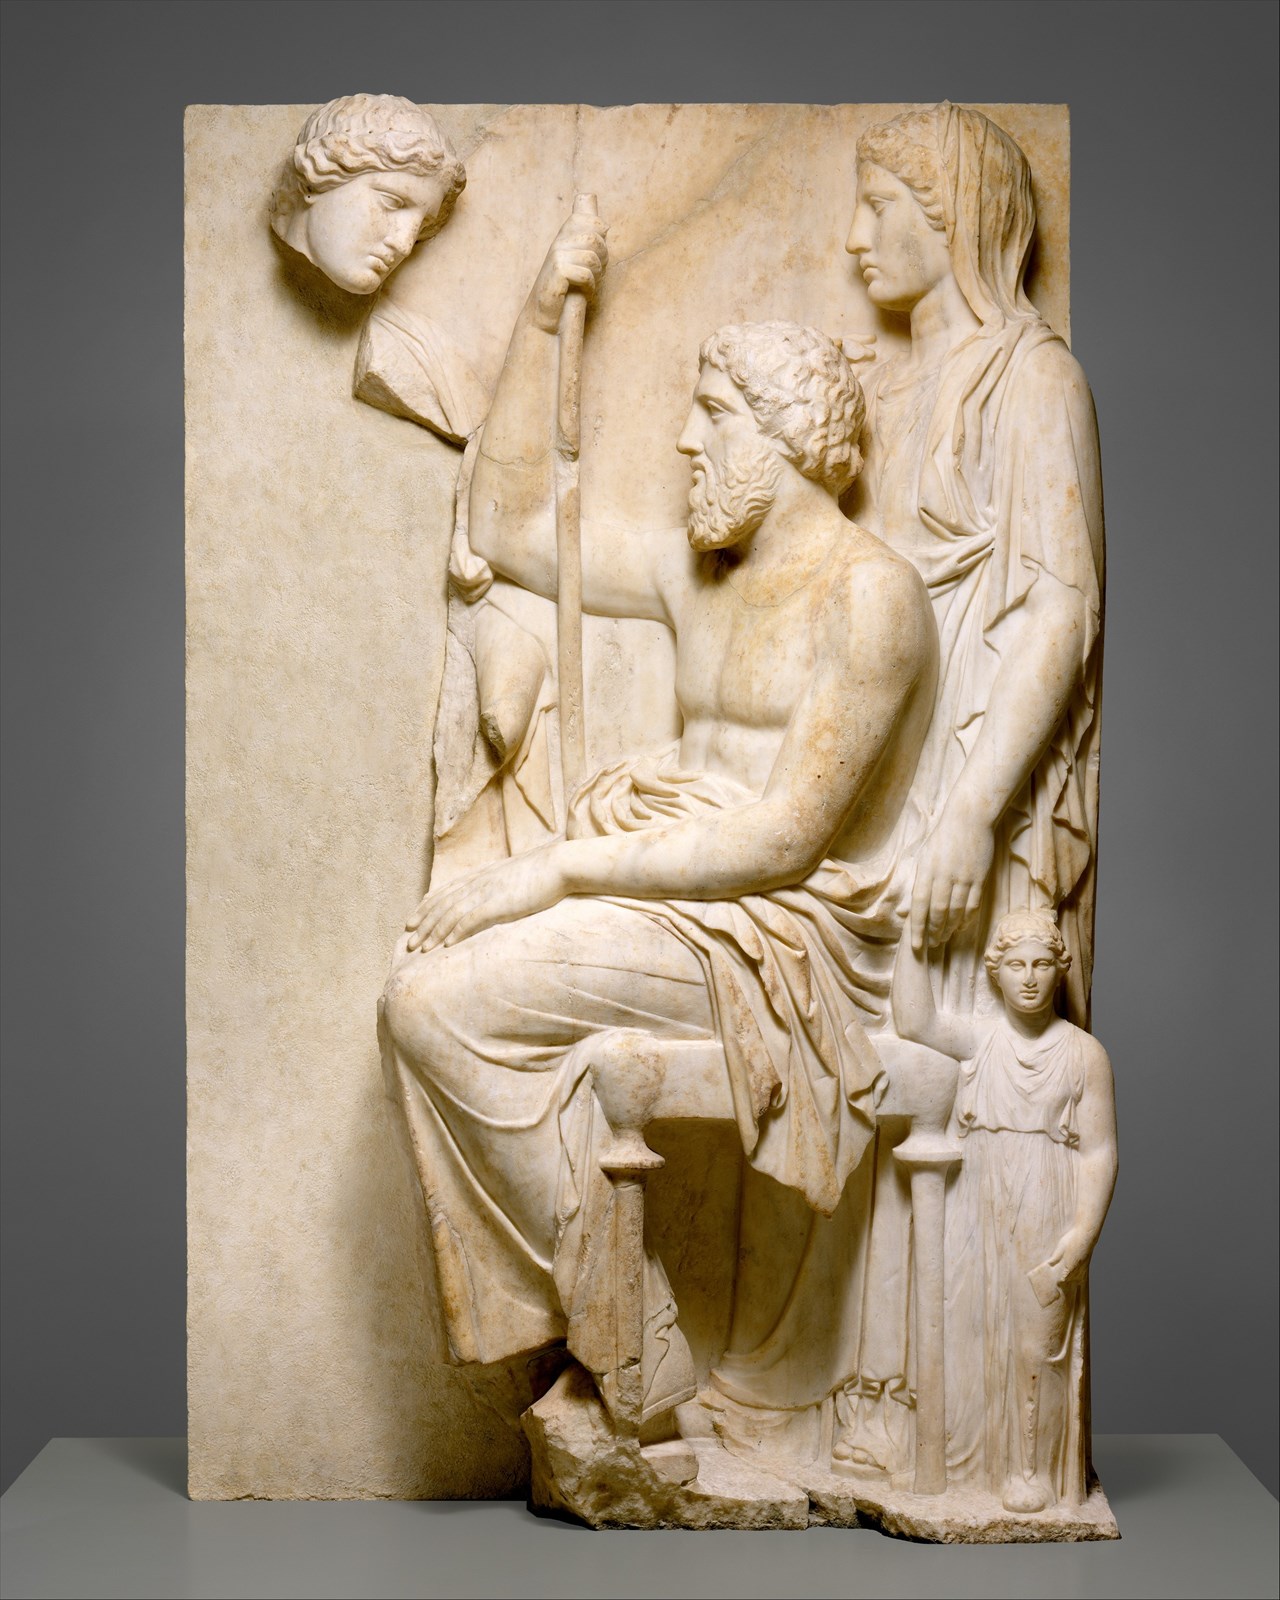 Marble grave stele with a family group Greek, Attic  ca. 360 BCE https://www.metmuseum.org/art/collection/search/248483